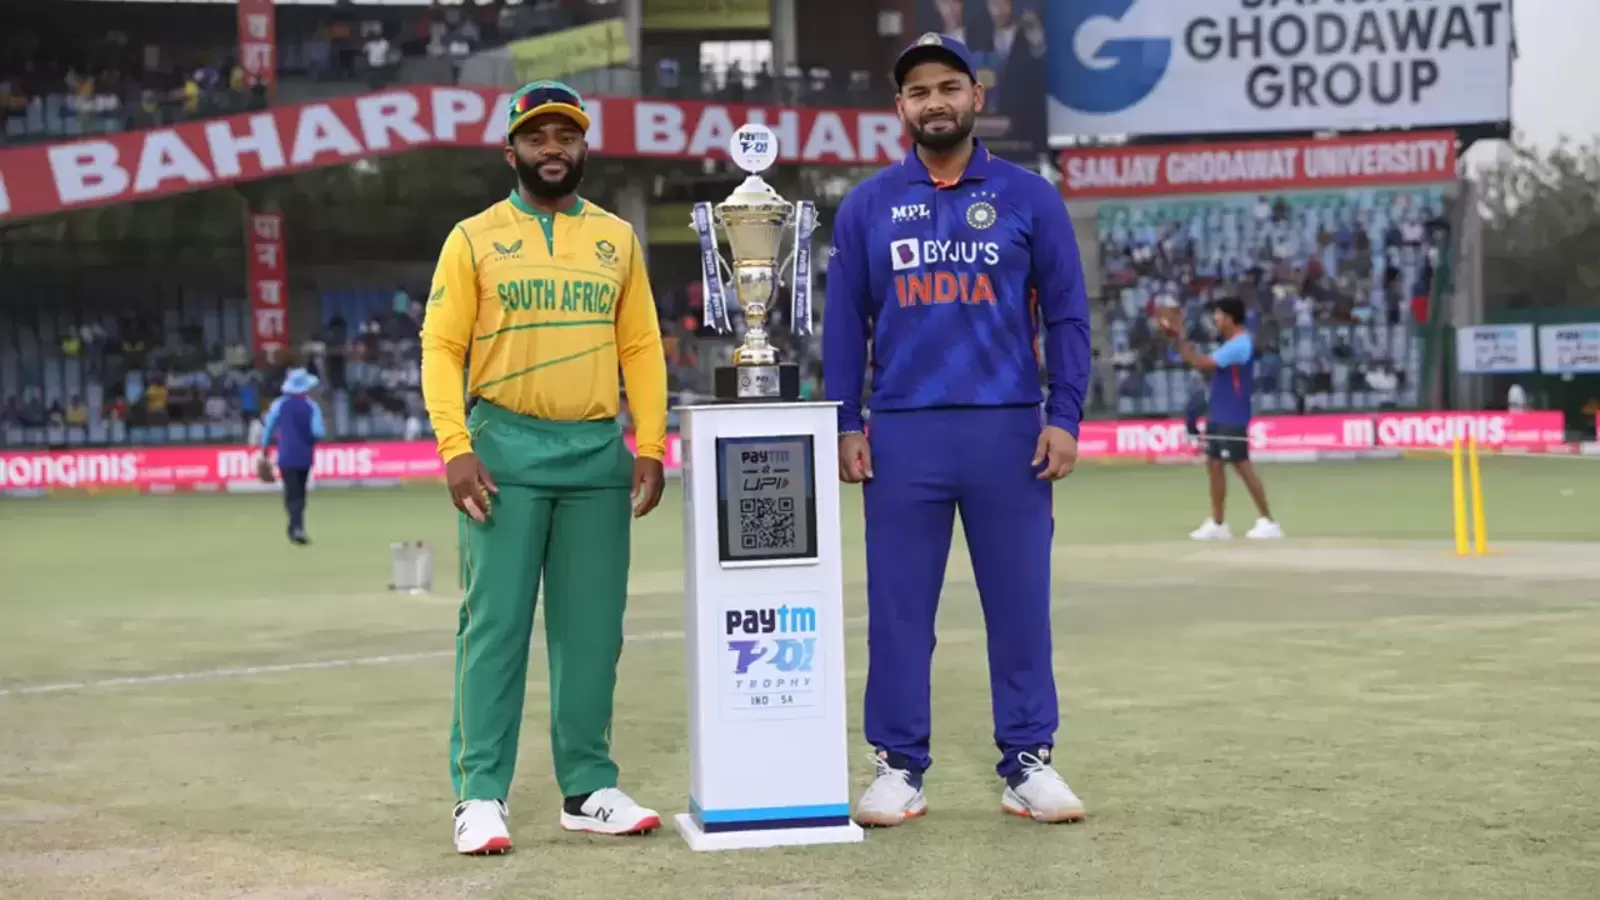 India vs South Africa 2nd T20 Live Streaming When and where to watch IND vs SA Cricket